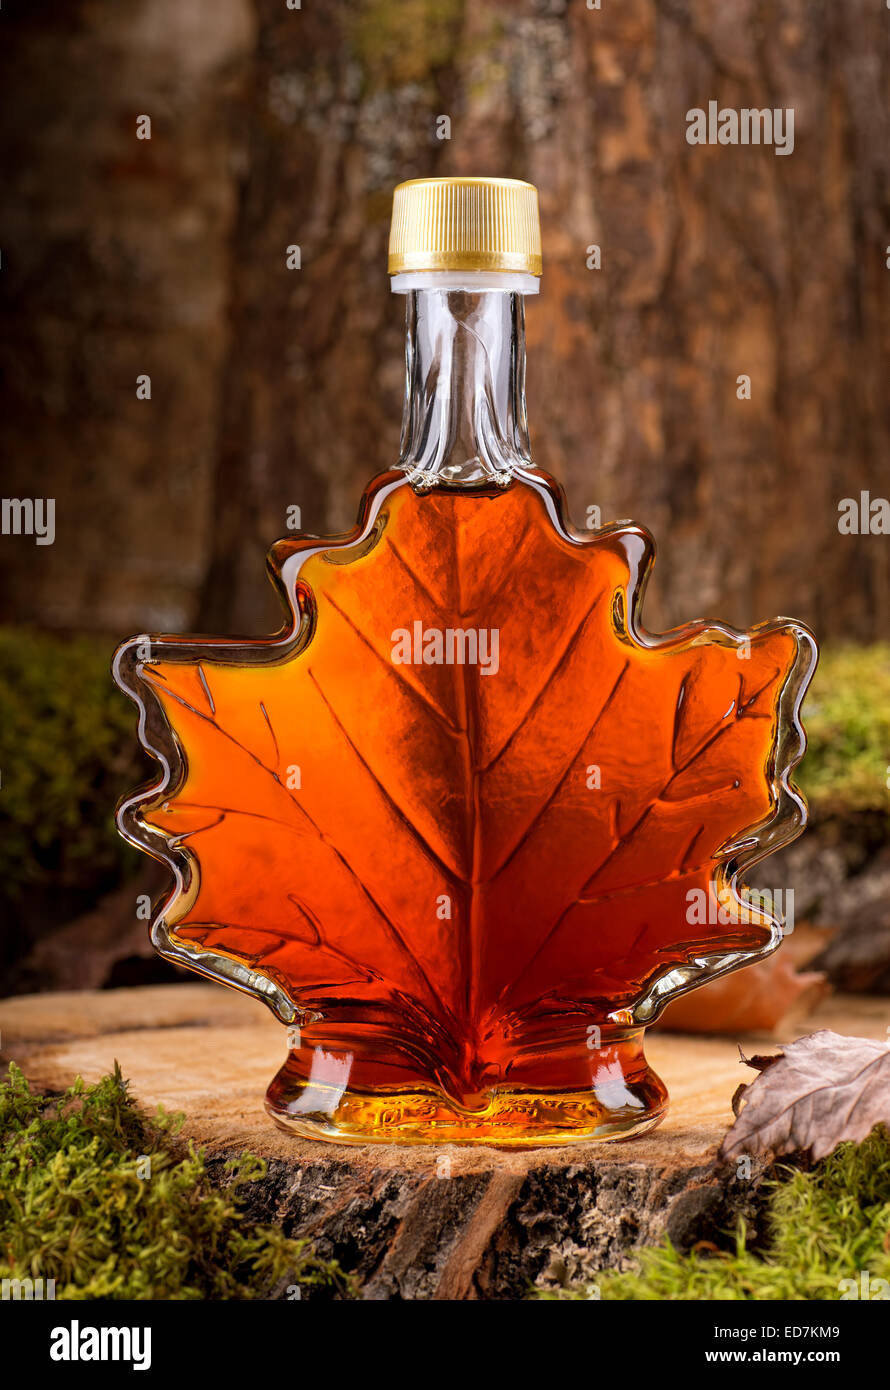 A bottle of delicious maple syrup in hardwood forest setting. Stock Photo